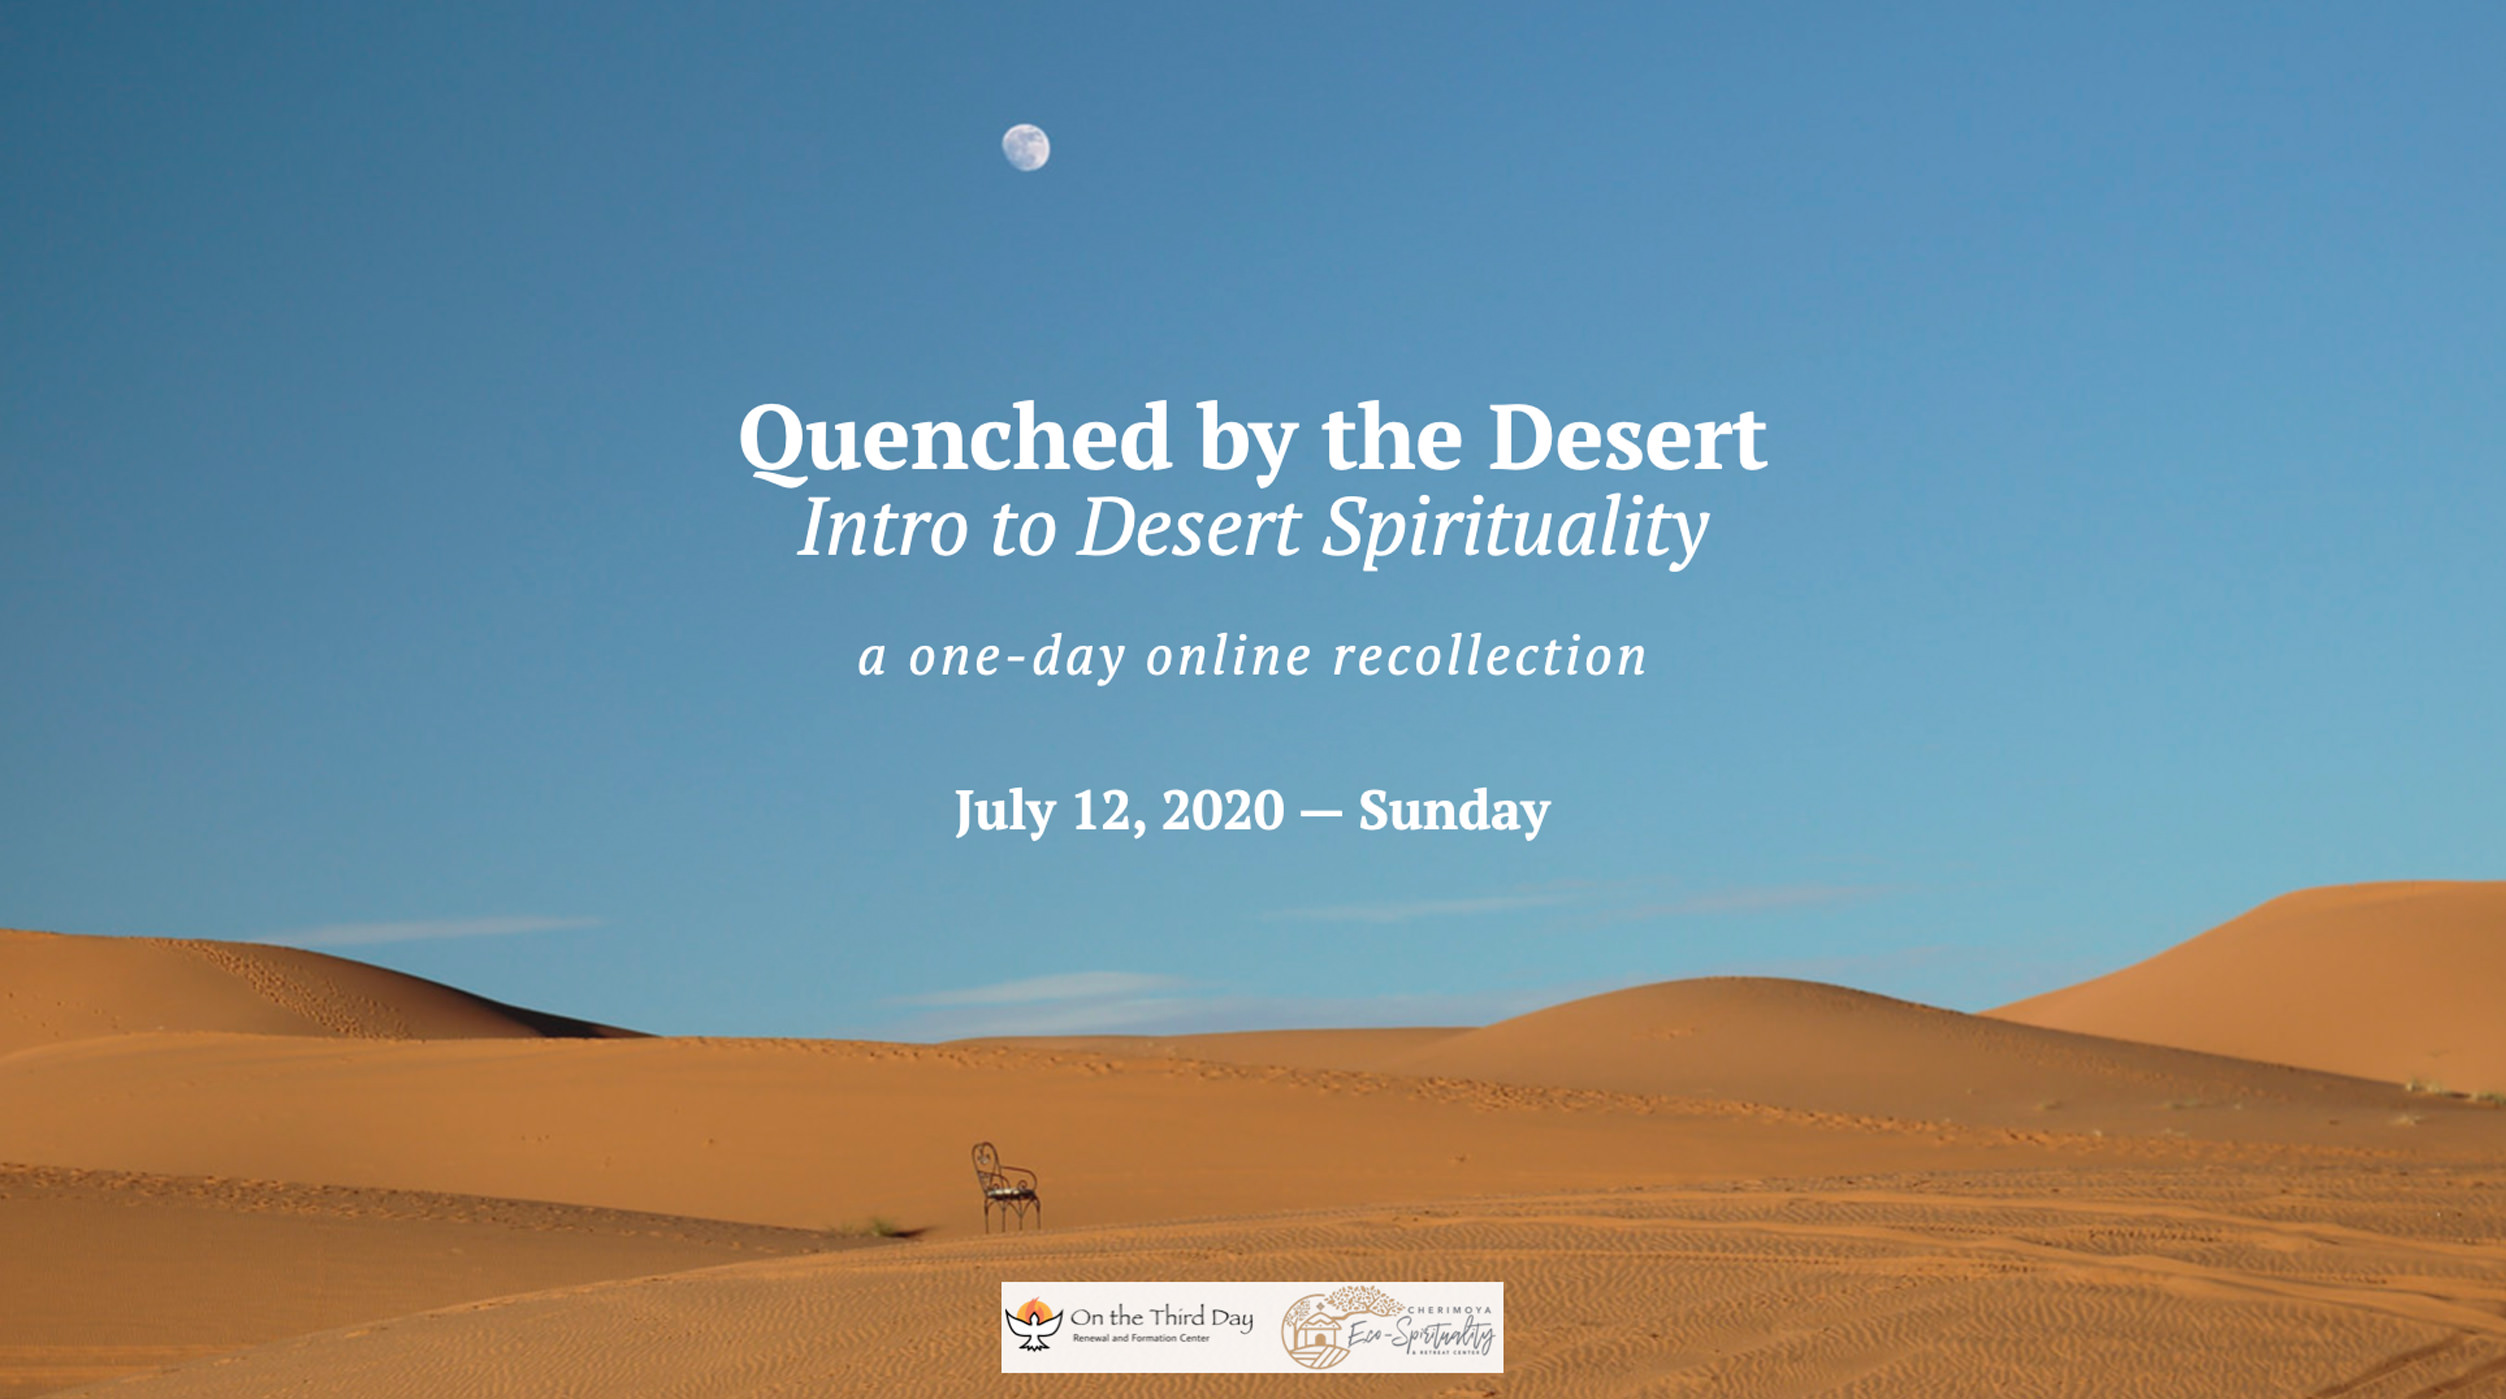 Quenched by the desert